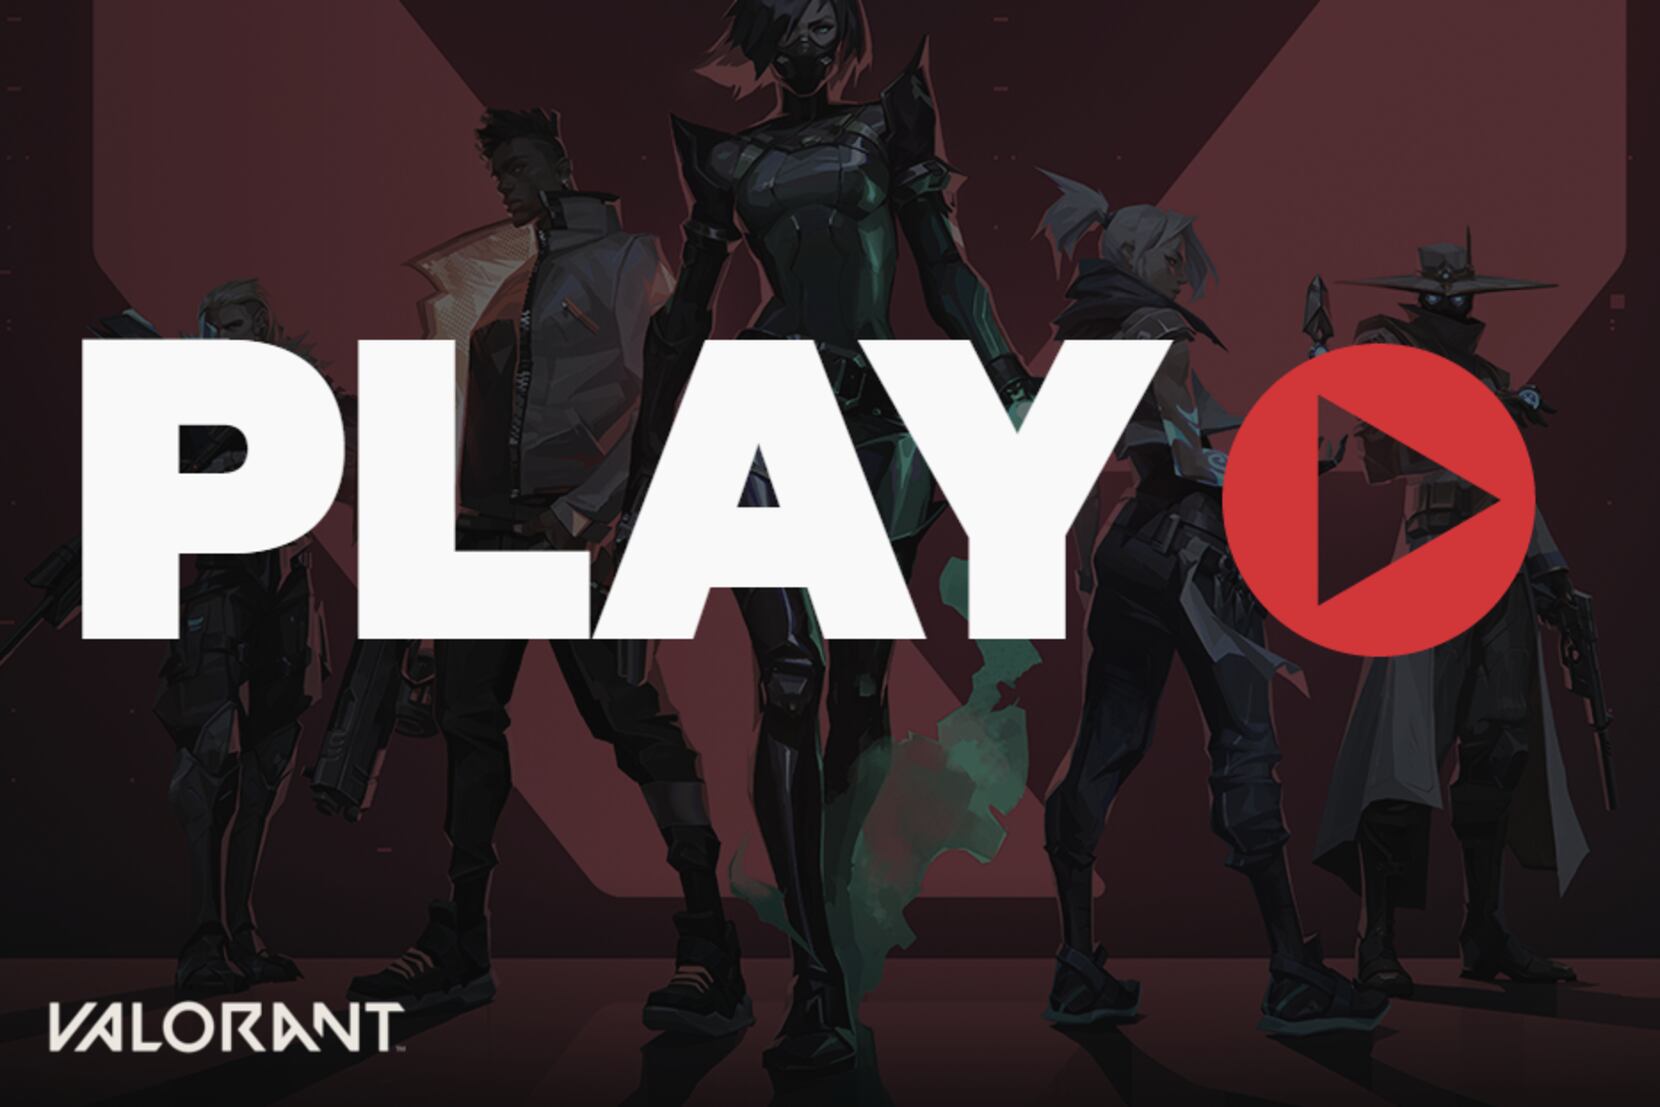 Riot brings 'League of Legends,' Valorant' and other titles to